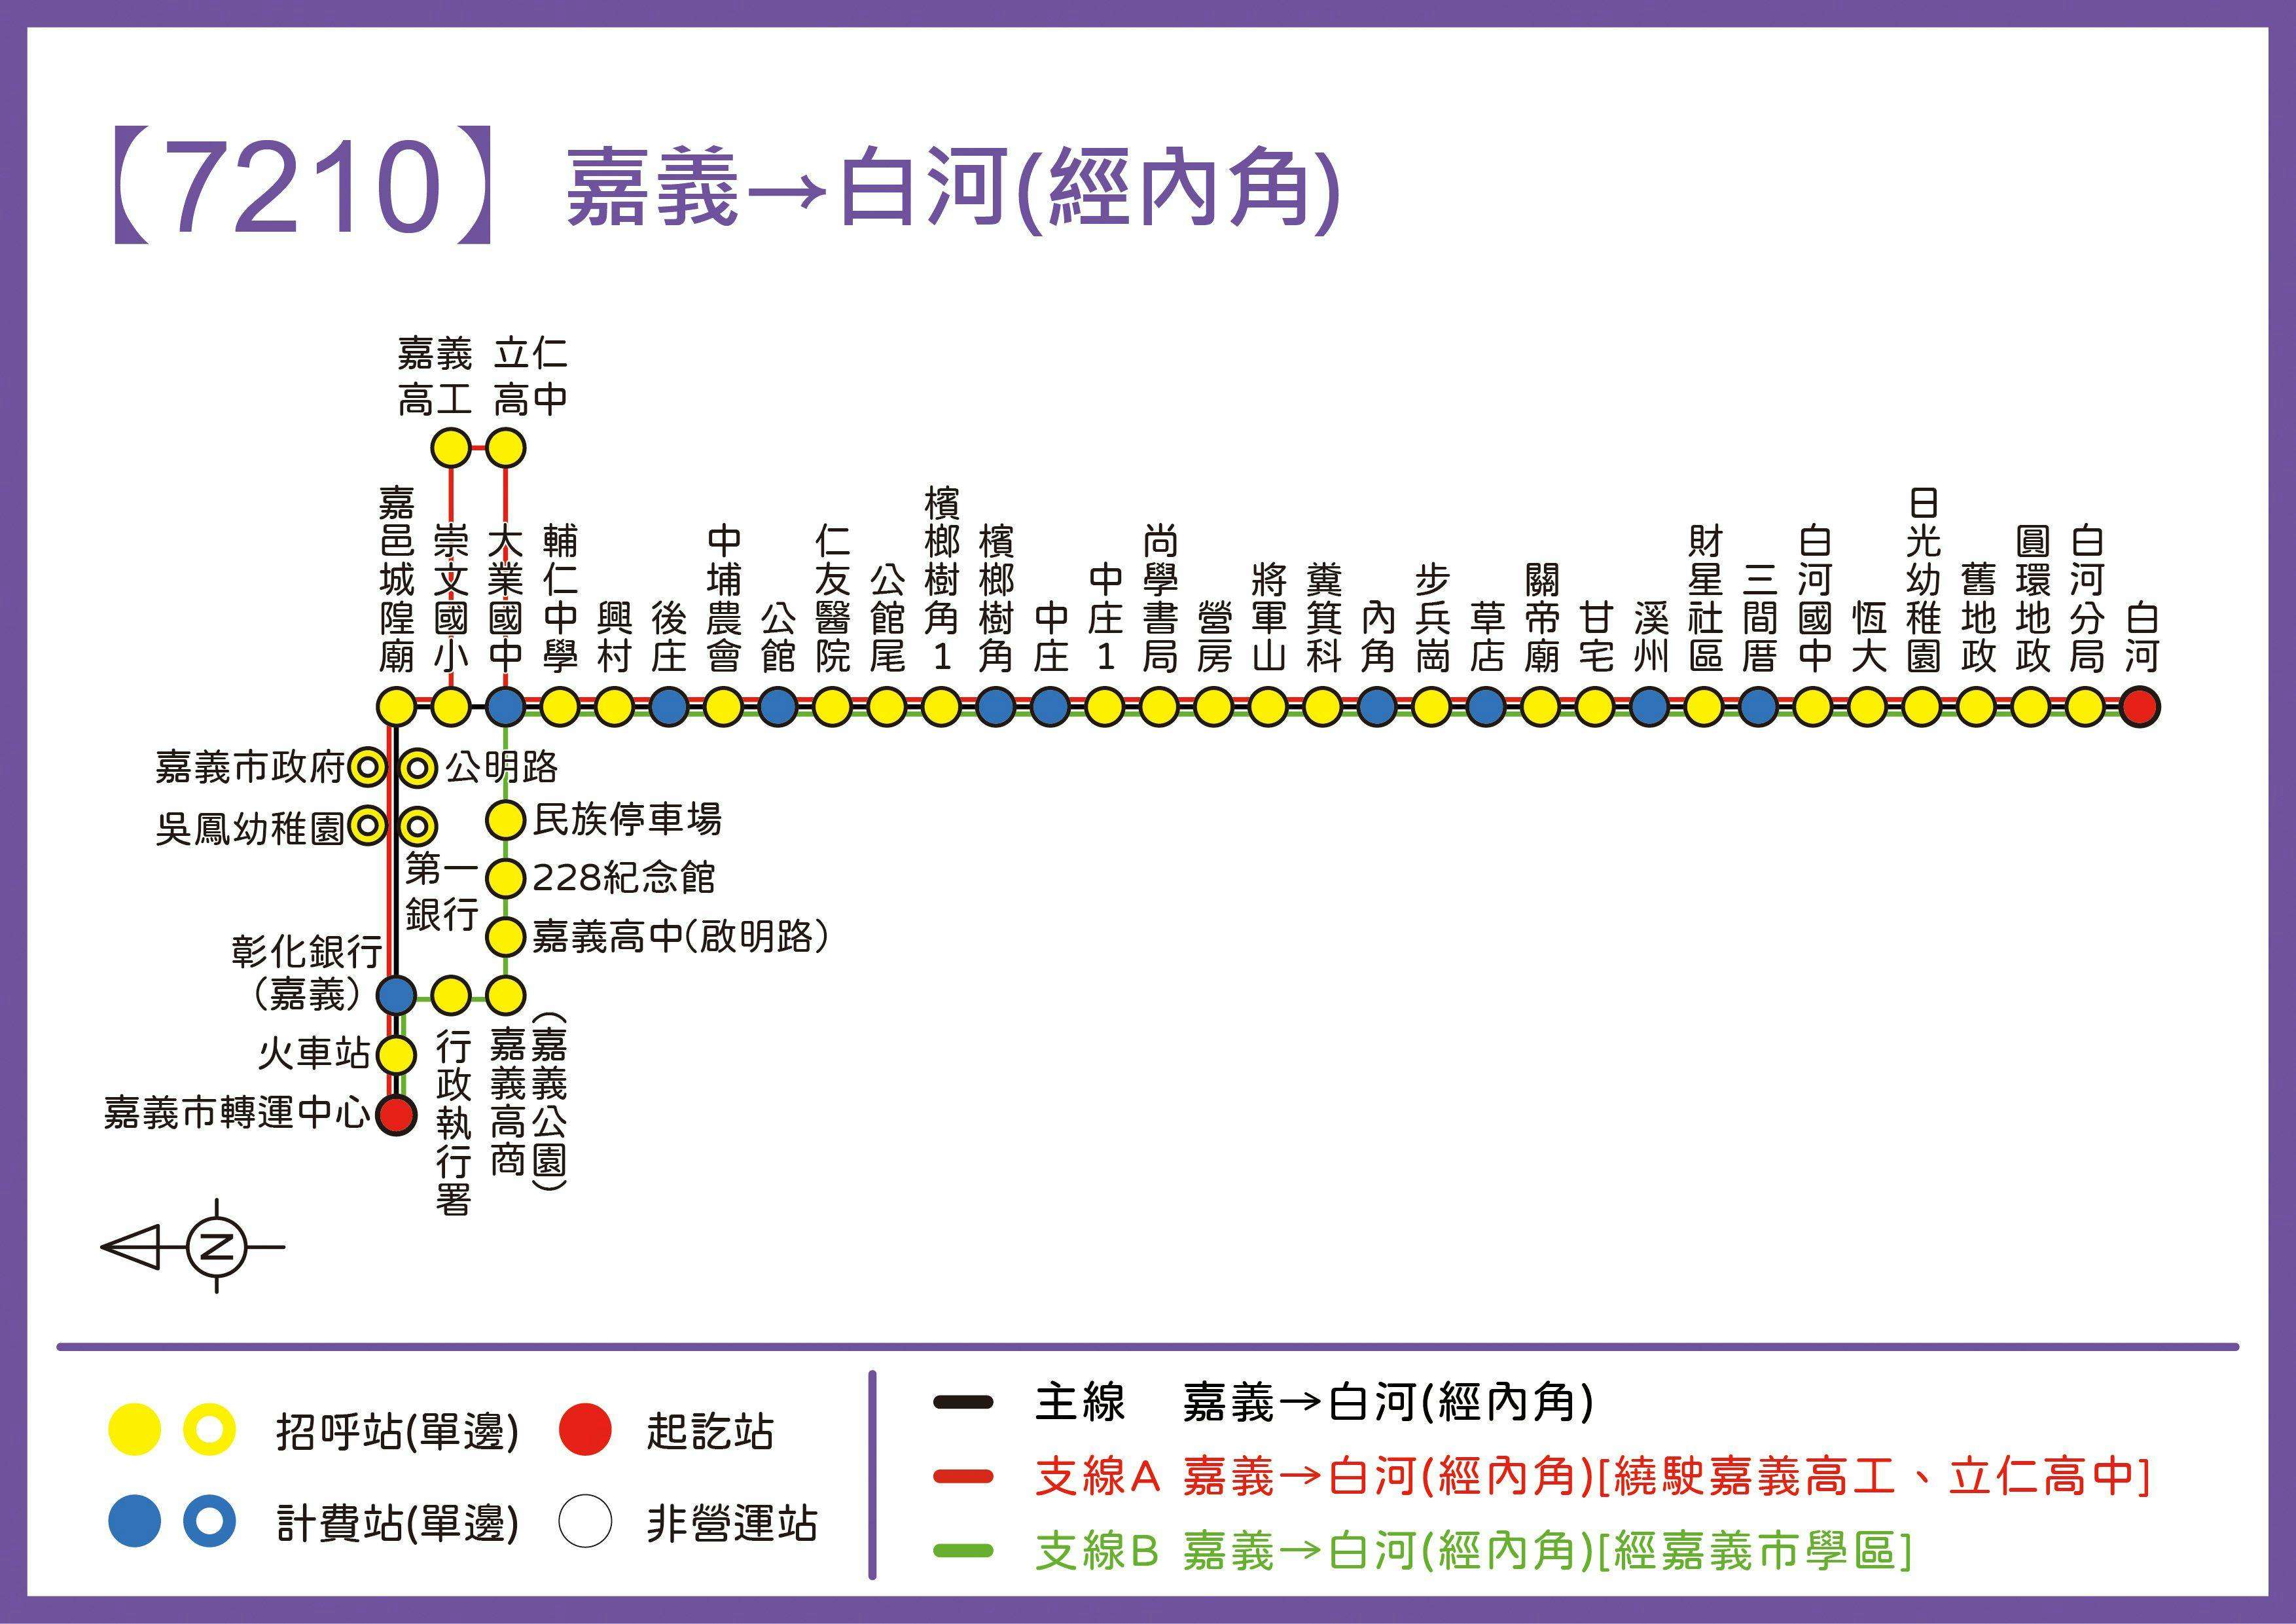 7210Route Map-Chiayi Bus